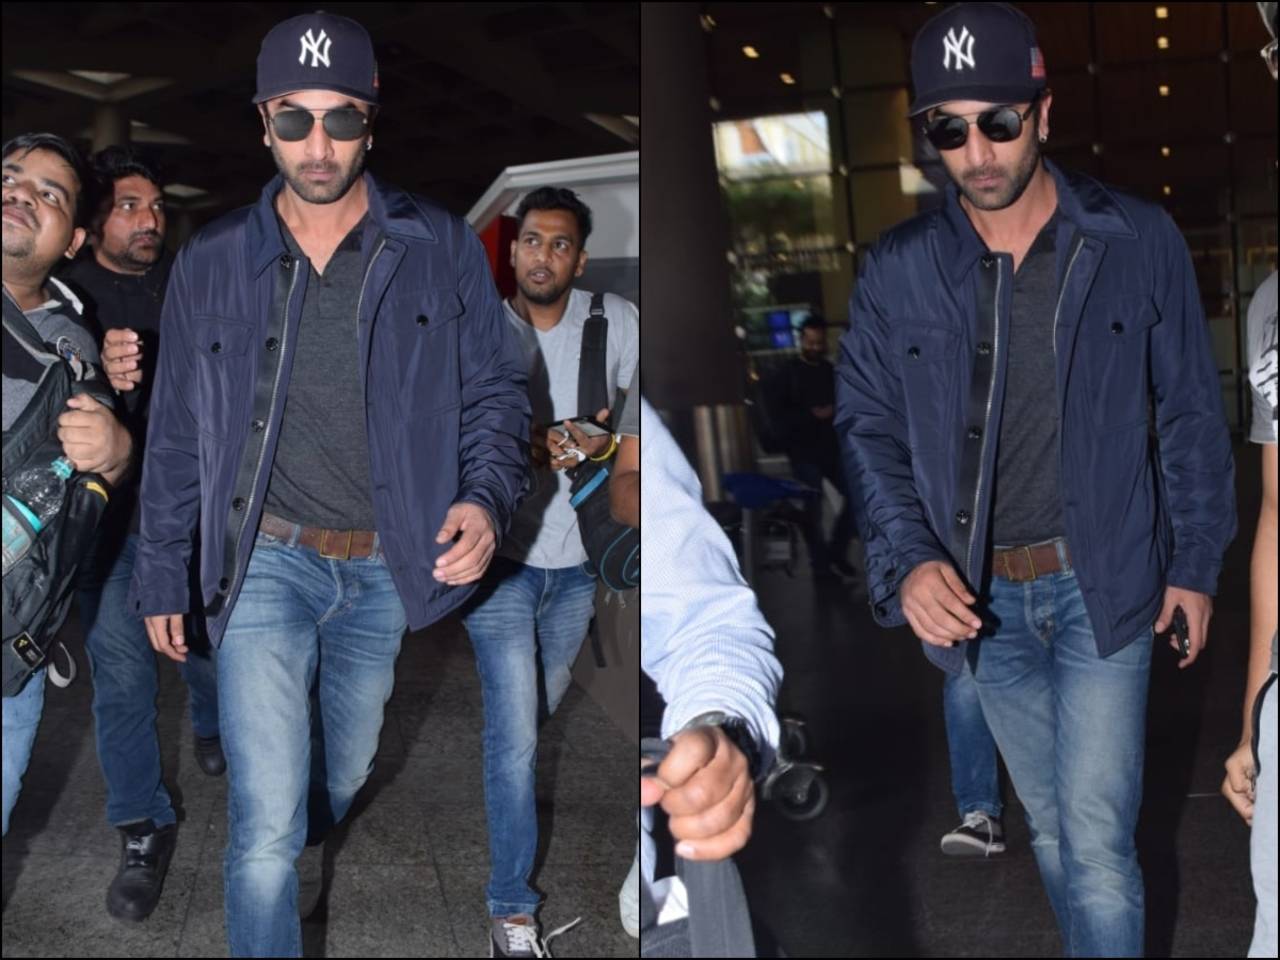 Ranbir Kapoor Birthday: The Poster Boy for Casual Fashion, His Styling is  Simple and Fuss-Free (View Pics)